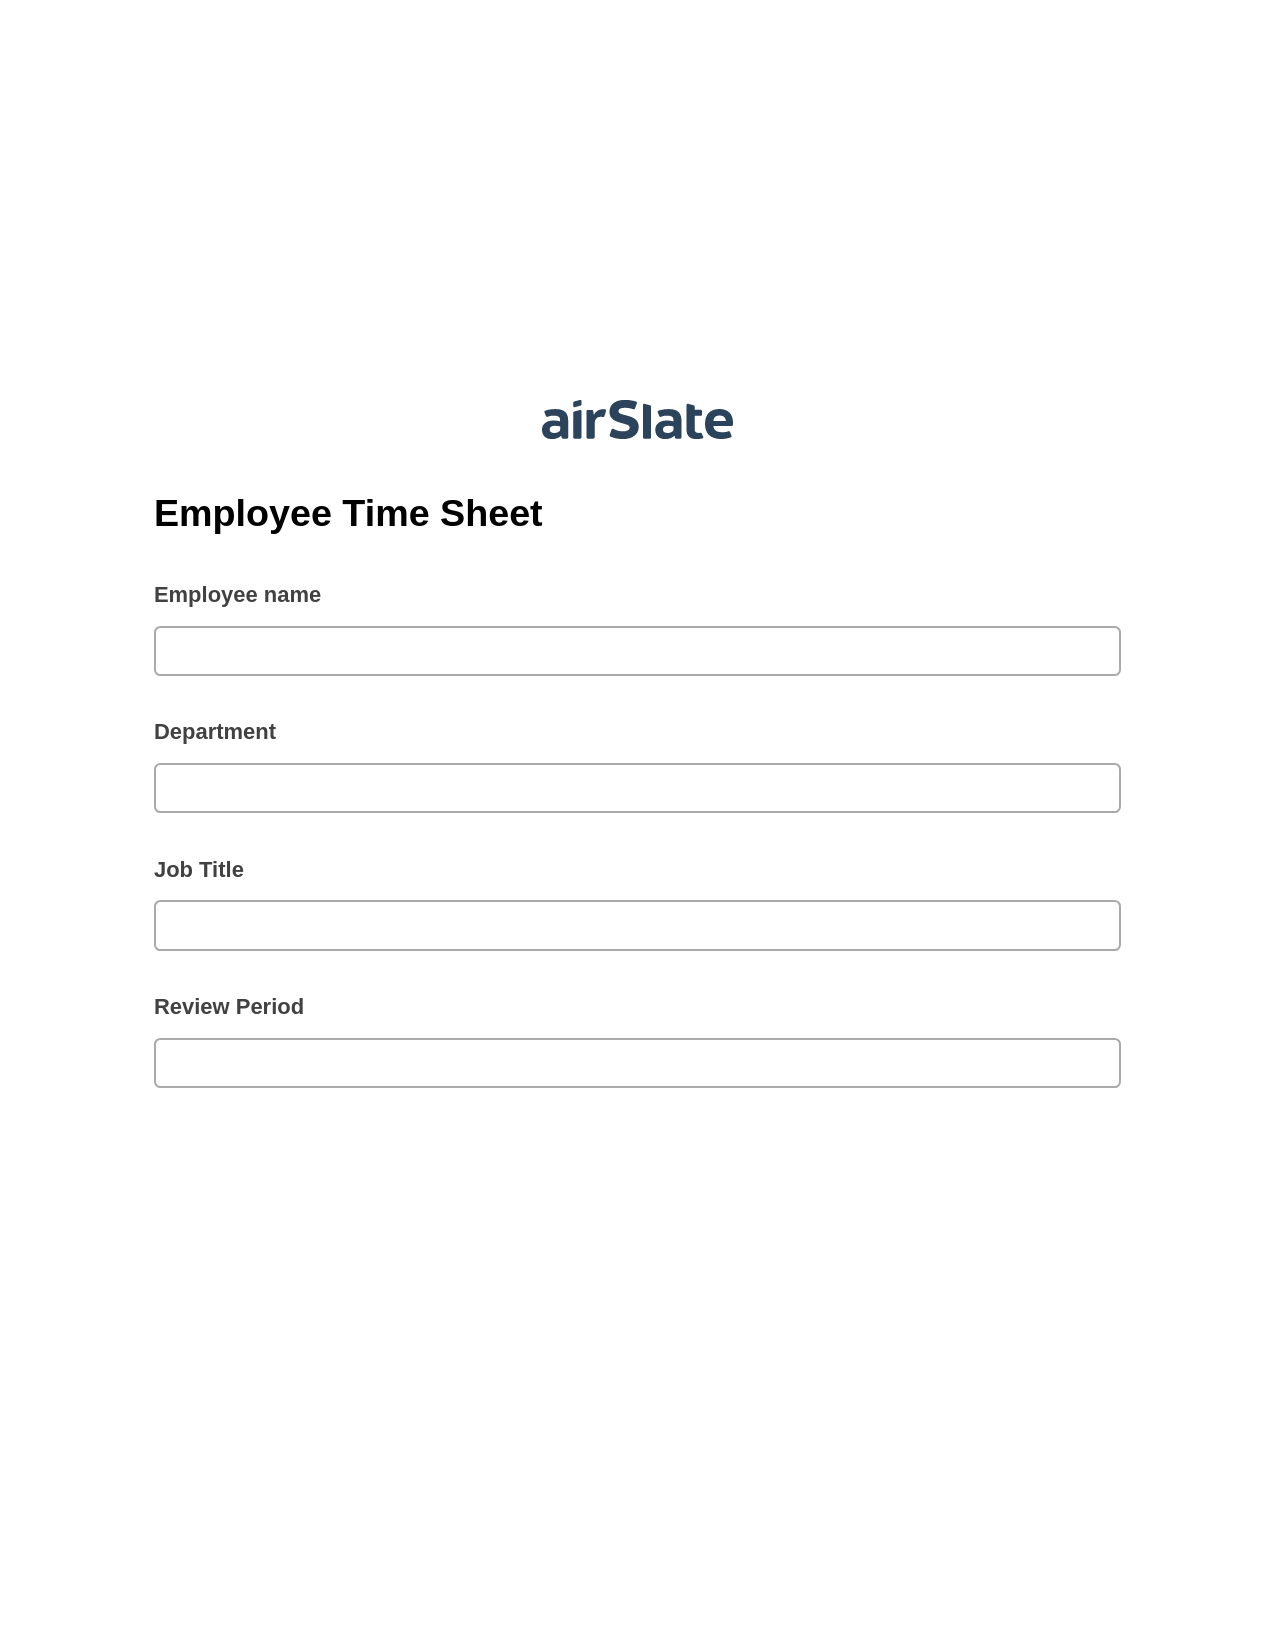 Employee Time Sheet Prefill from NetSuite records, Update Audit Trail Bot, Slack Two-Way Binding Bot